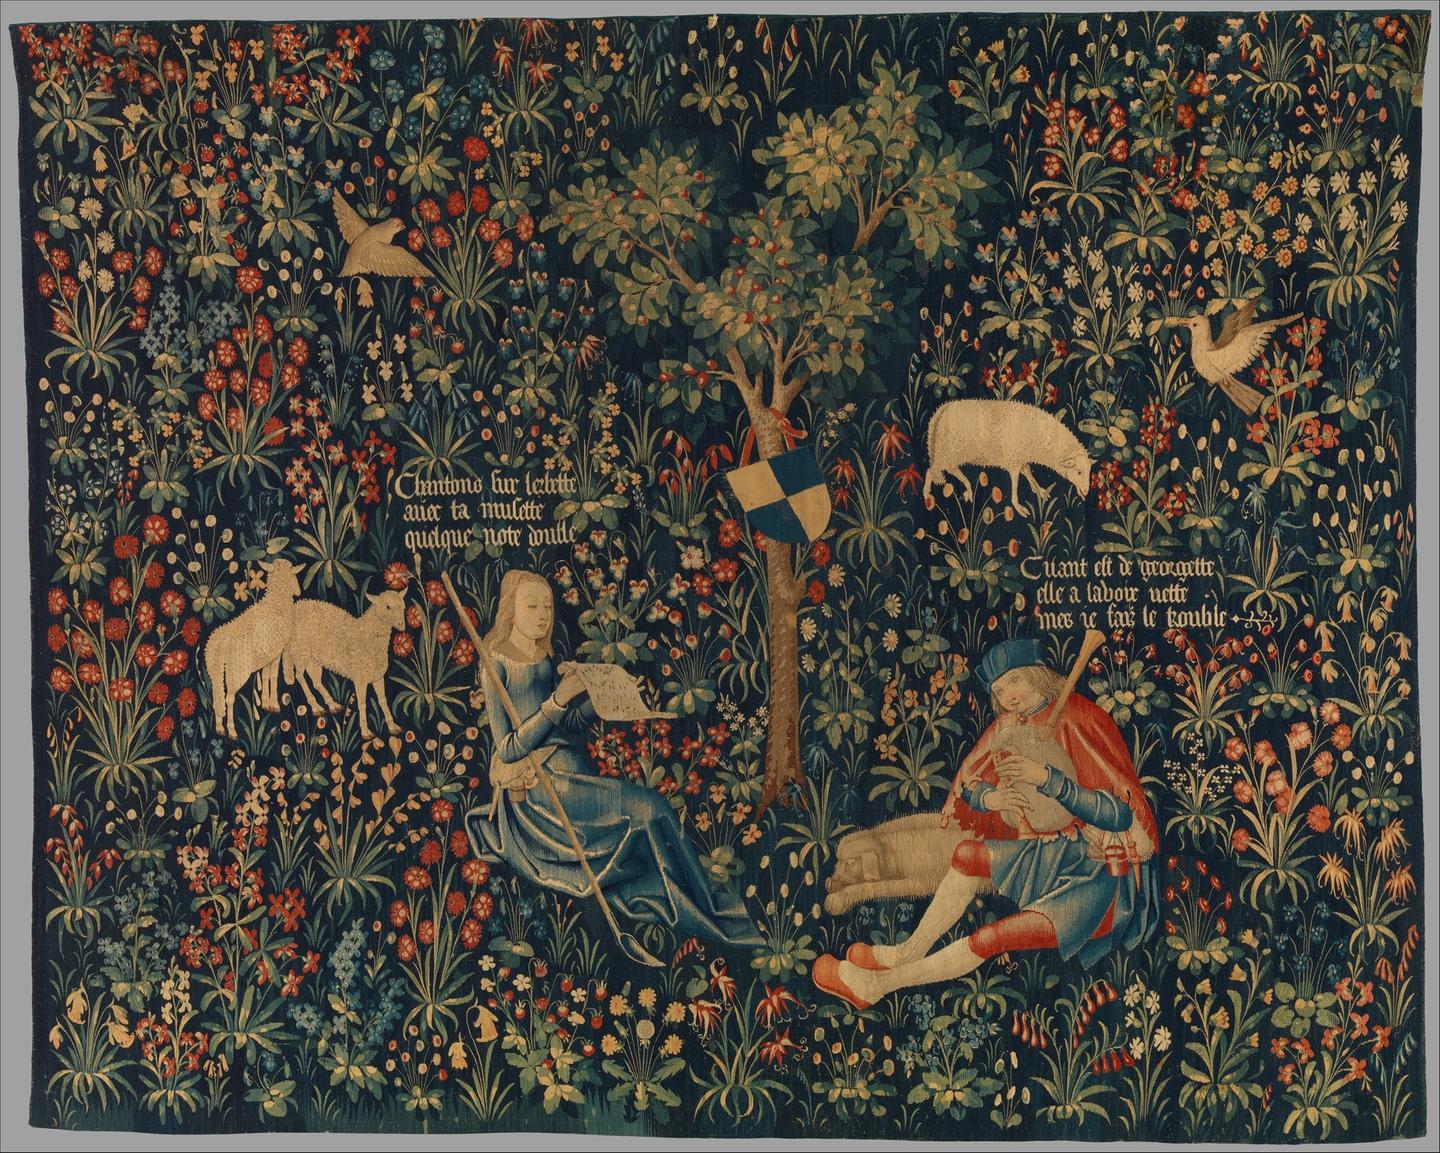 Shepherd and Shepherdess Making Music, licensed under CC0 1.0. https://www.metmuseum.org/art/collection/search/468721